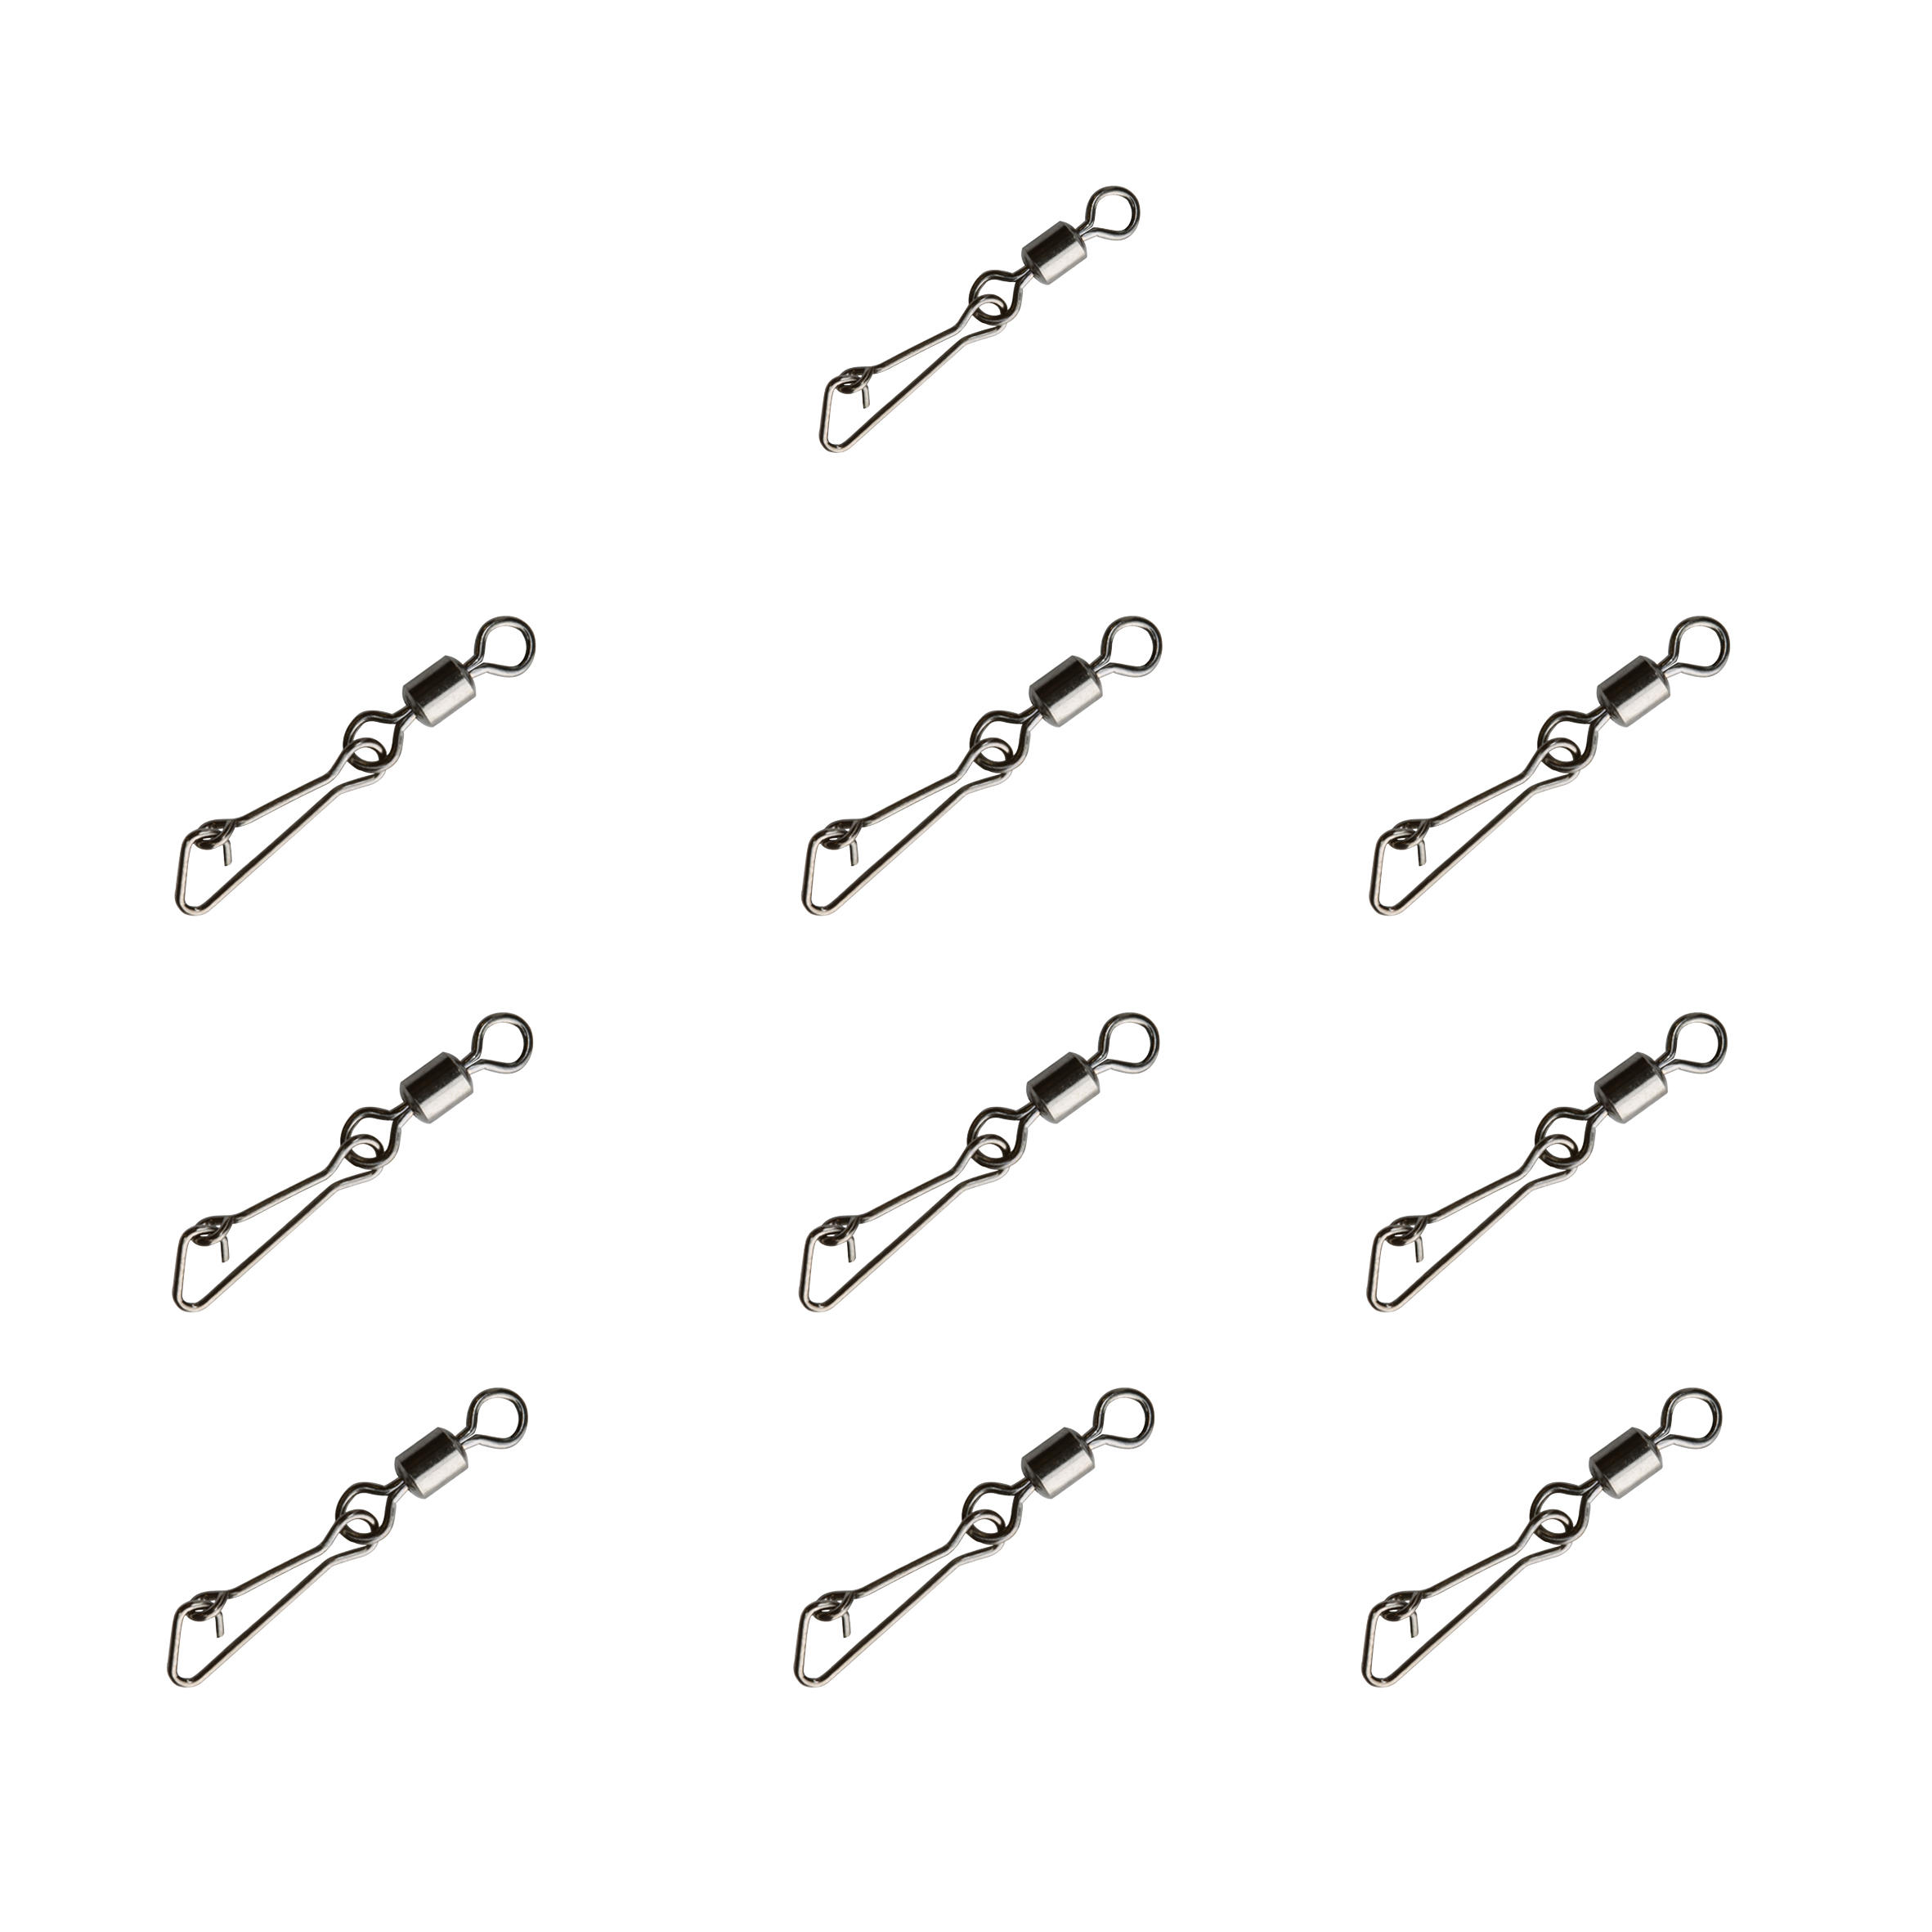 STAINLESS STEEL QUICK SNAP FISHING CLIP X10 CAPERLAN